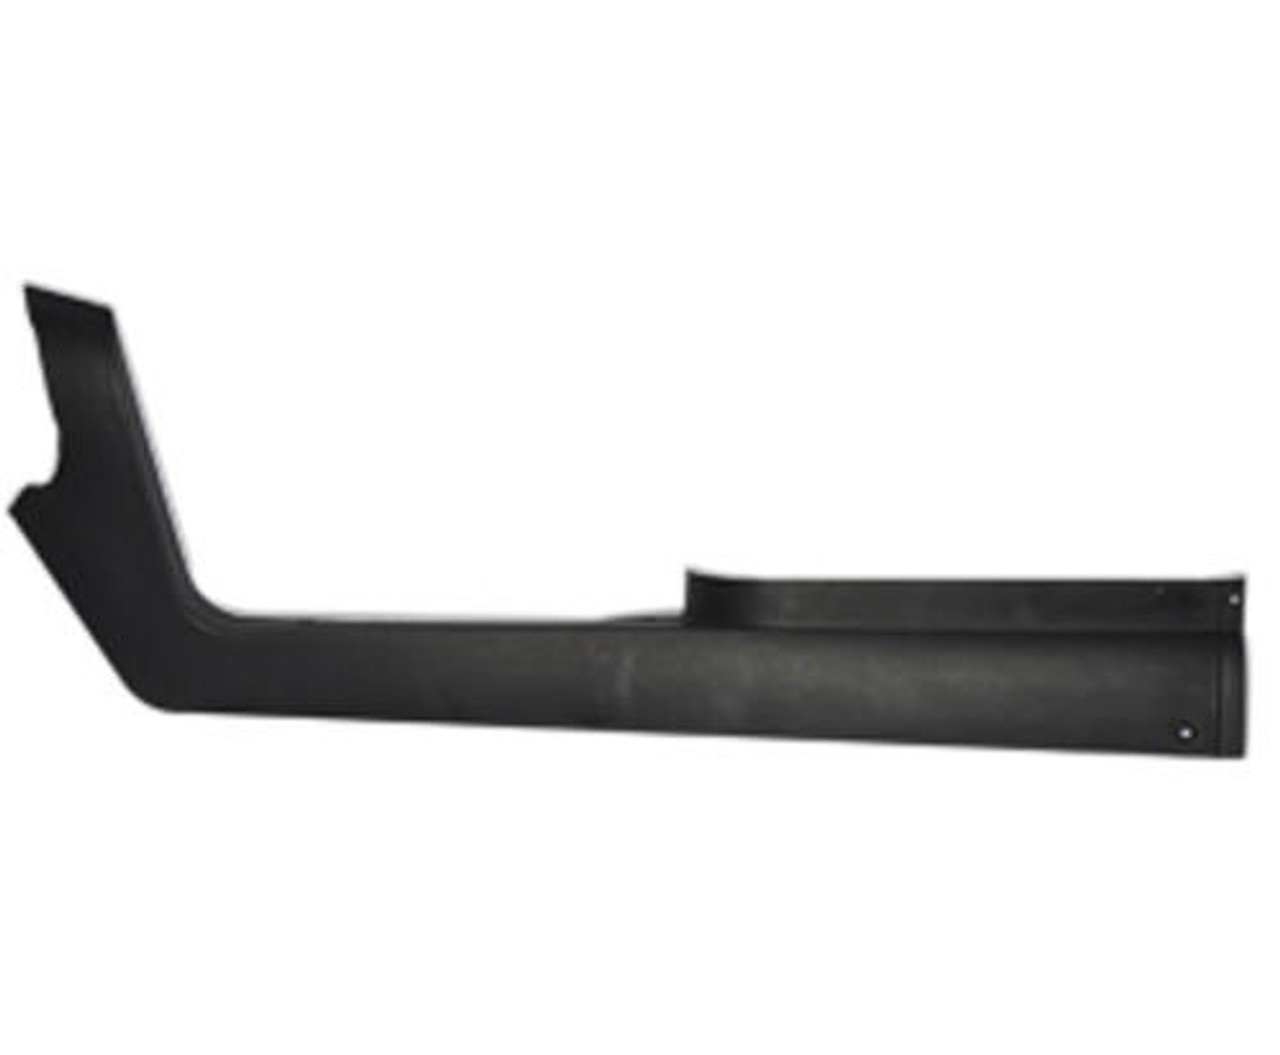  Madjax Replacement Side Panel (Driver's Side) for Club Car Precedent (2004-2014) 